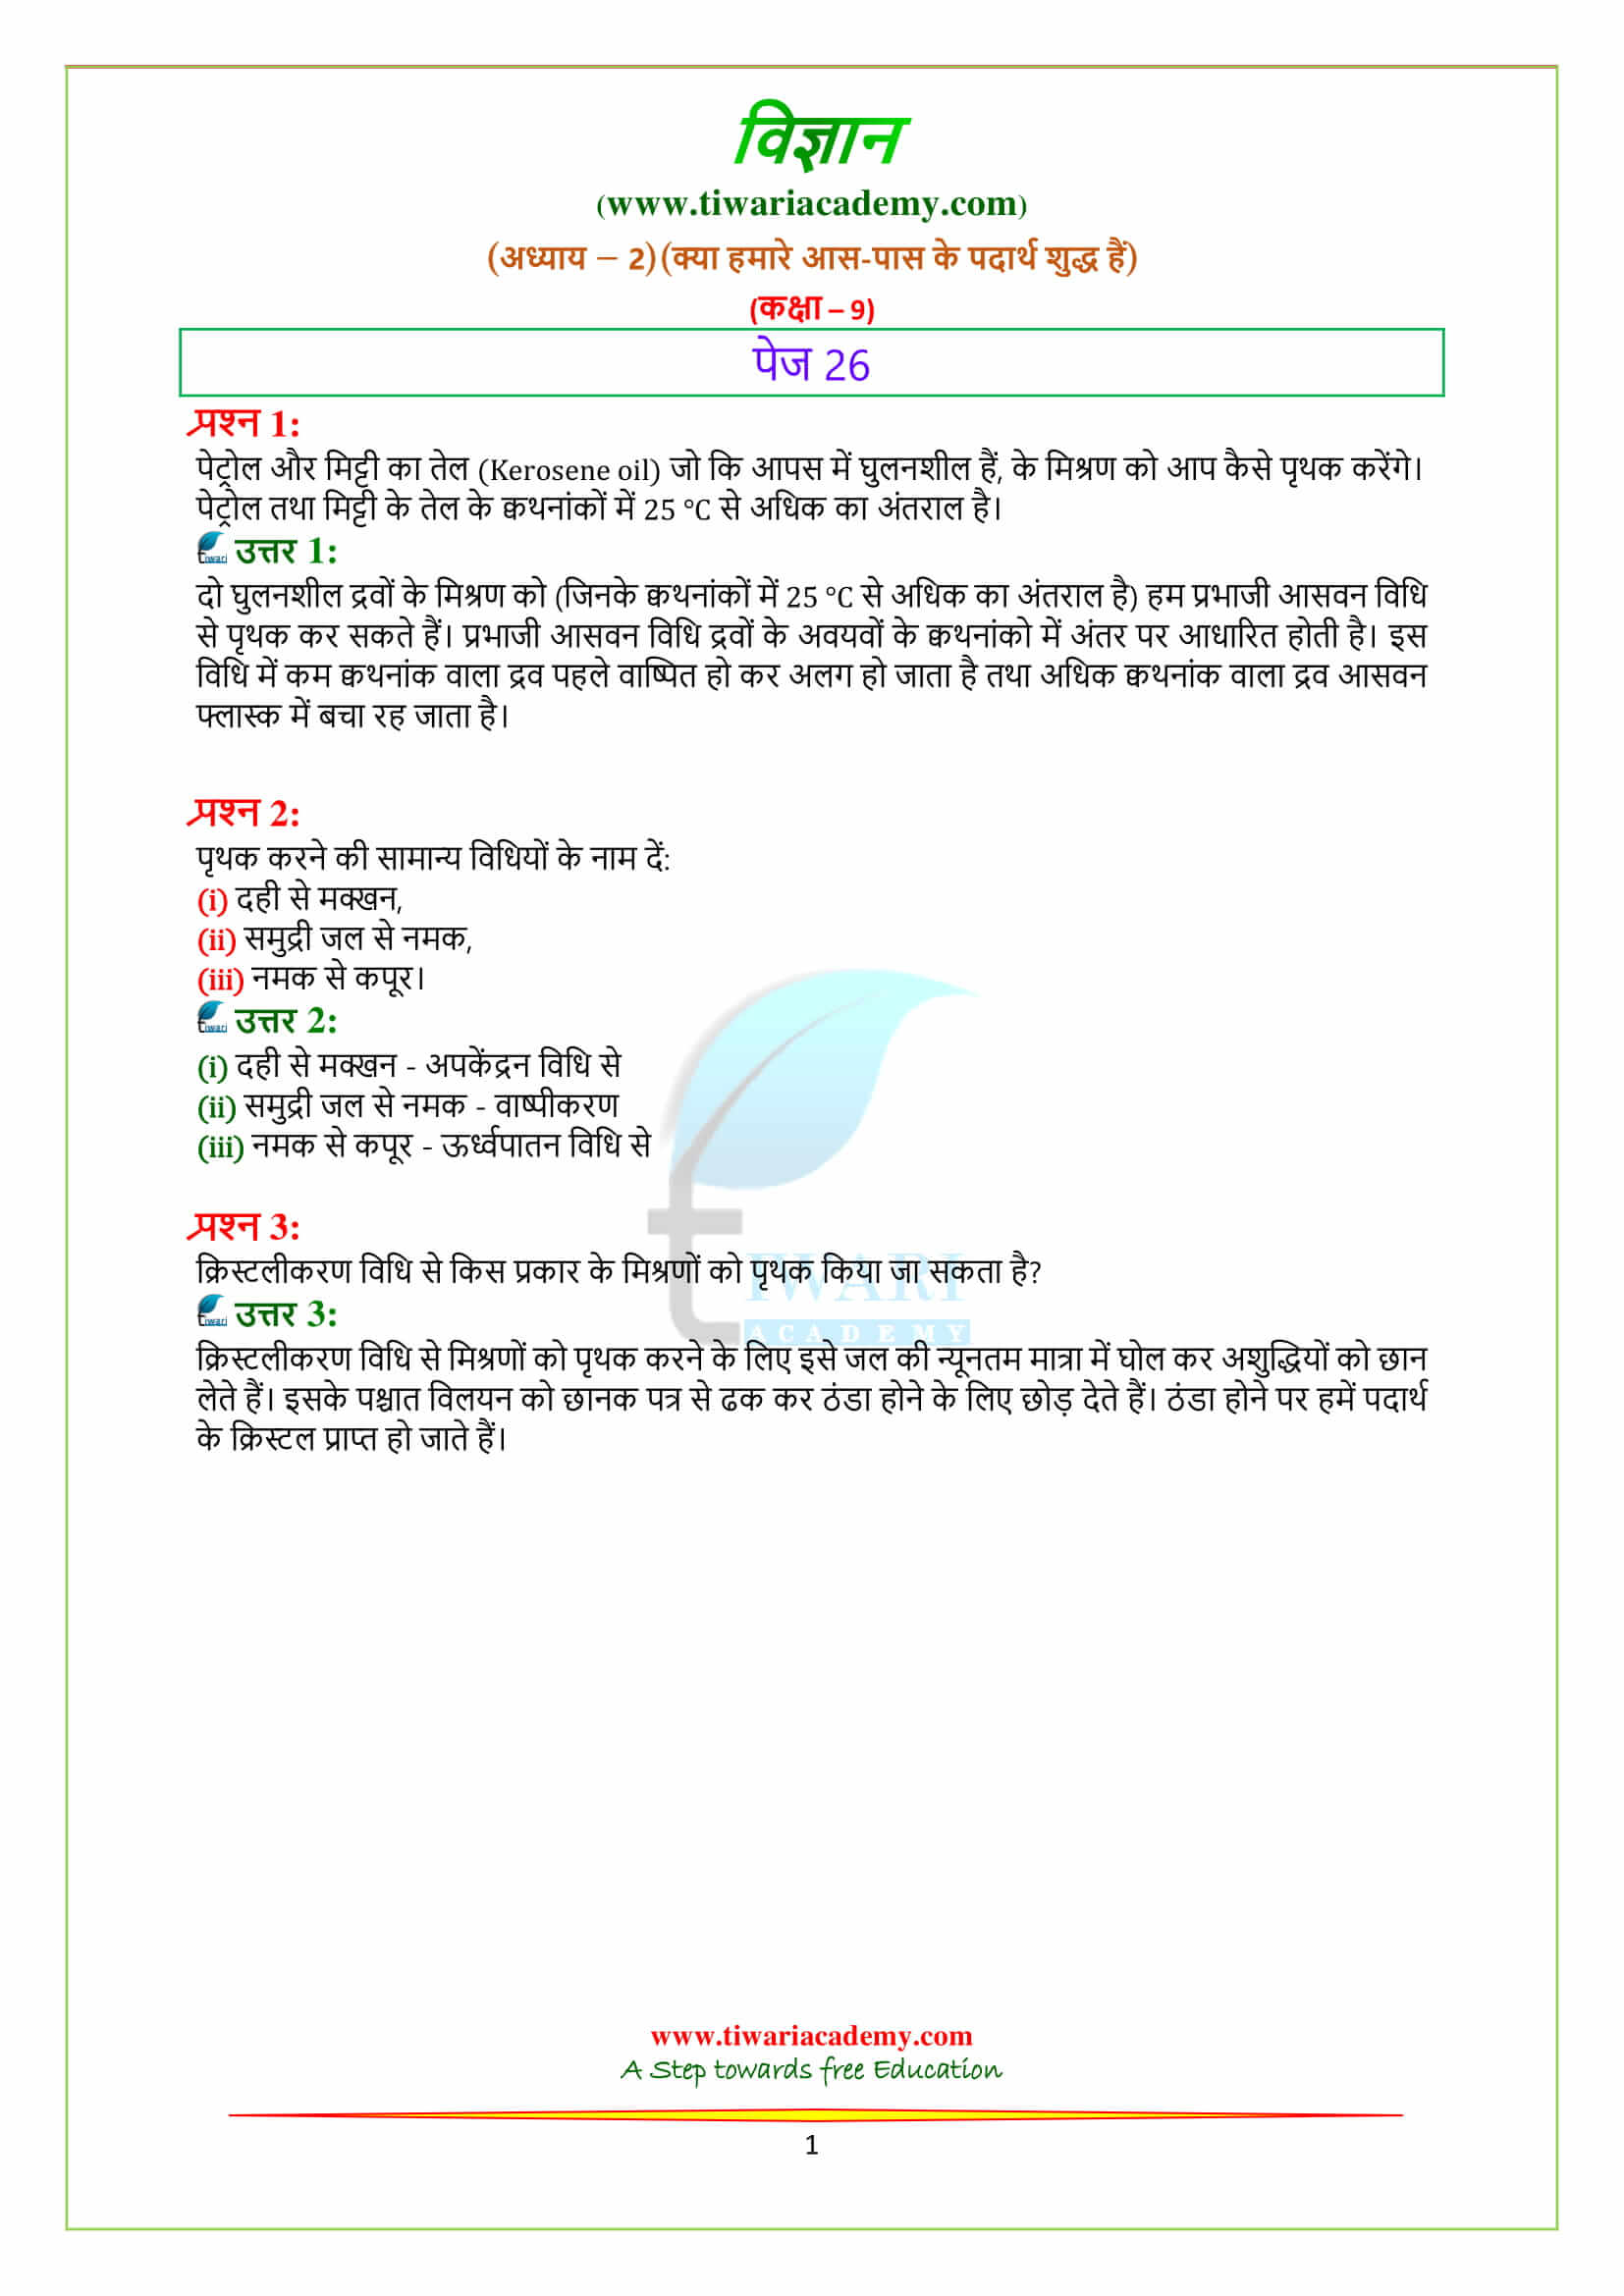 NCERT Solutions for Class 9 Science Chapter 2 page 26 ke answers